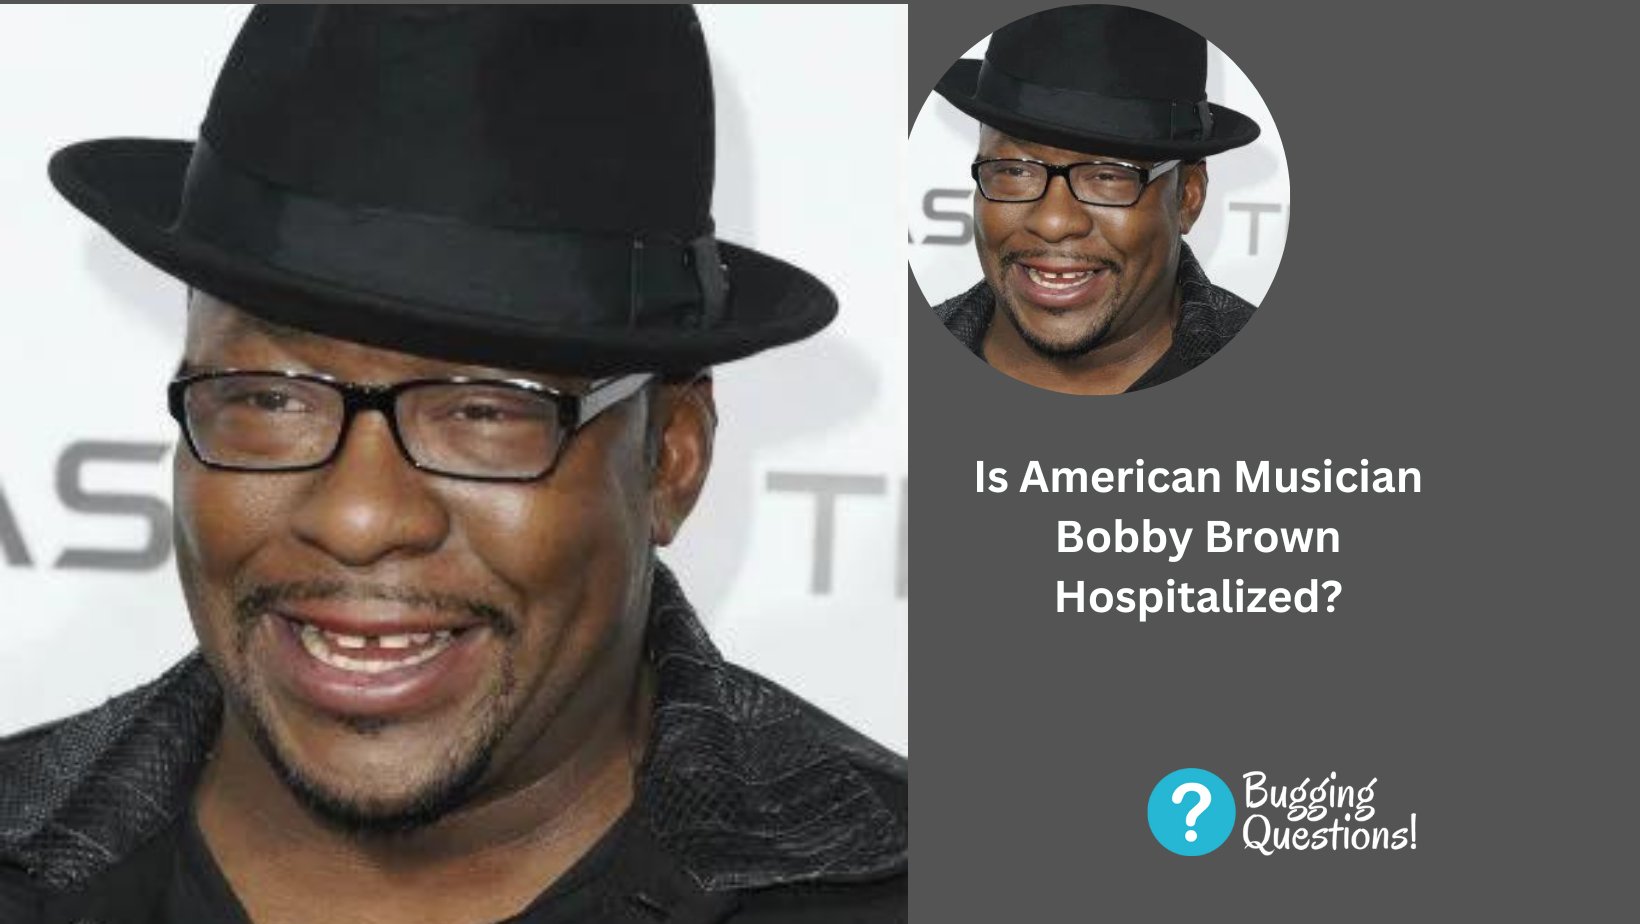 Is American Musician Bobby Brown Hospitalized?